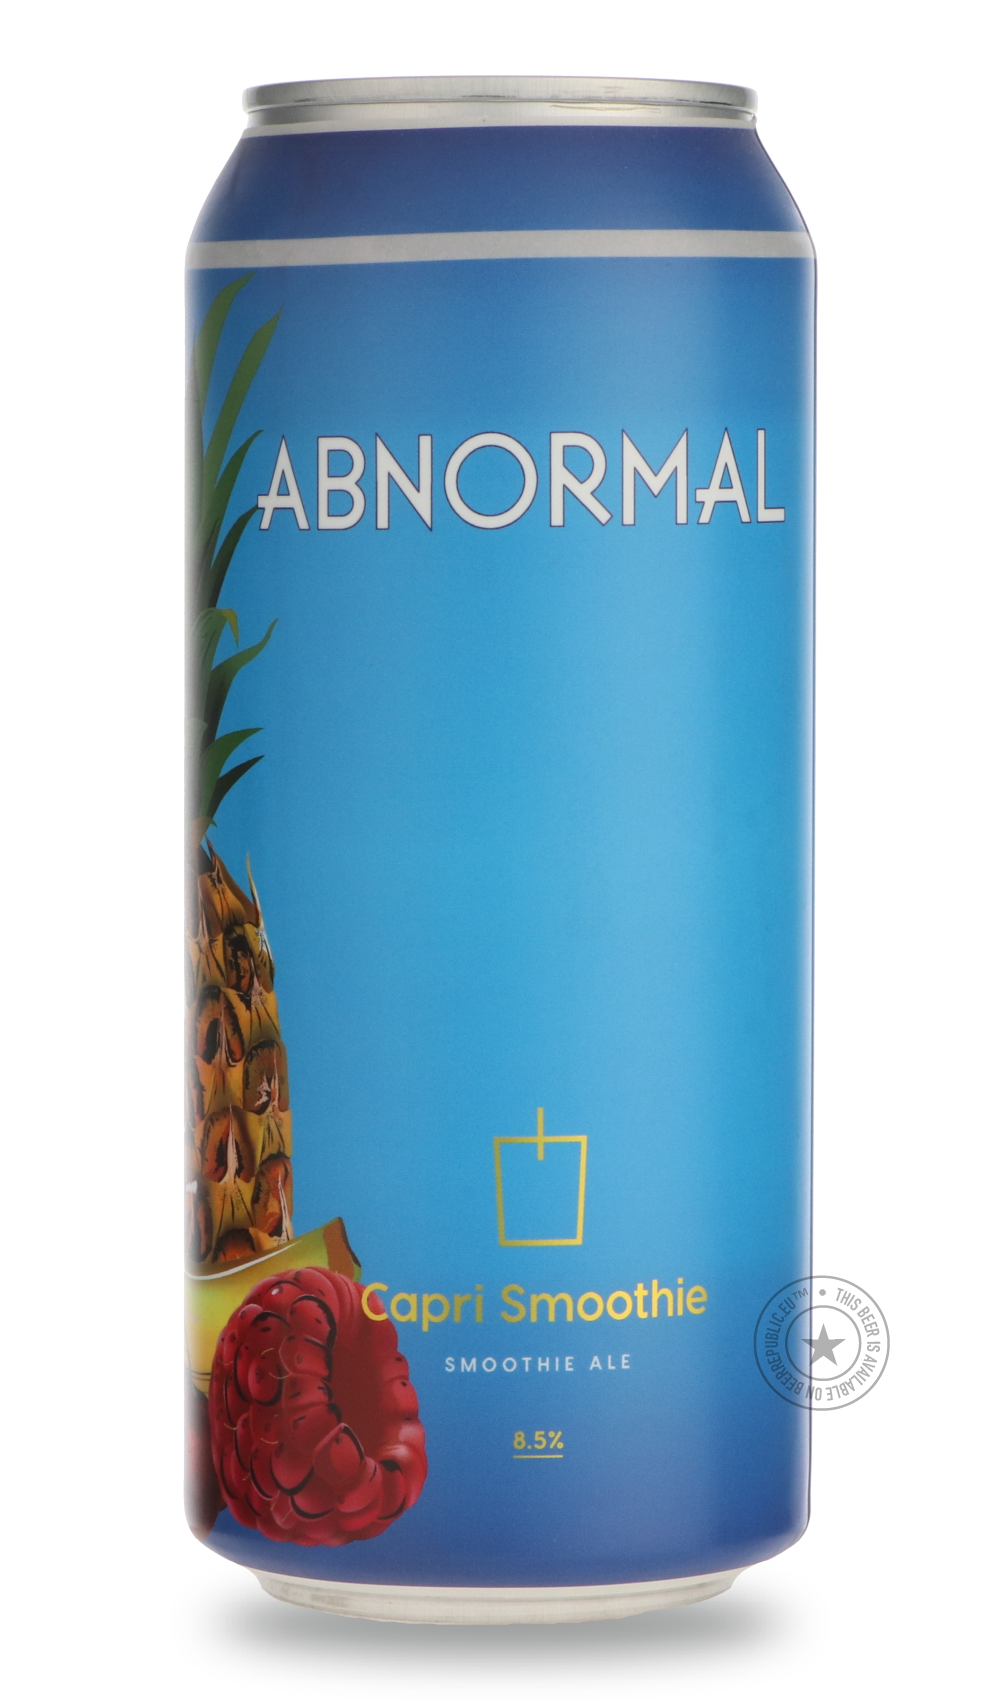 -Abnormal- Capri Smoothie-Sour / Wild & Fruity- Only @ Beer Republic - The best online beer store for American & Canadian craft beer - Buy beer online from the USA and Canada - Bier online kopen - Amerikaans bier kopen - Craft beer store - Craft beer kopen - Amerikanisch bier kaufen - Bier online kaufen - Acheter biere online - IPA - Stout - Porter - New England IPA - Hazy IPA - Imperial Stout - Barrel Aged - Barrel Aged Imperial Stout - Brown - Dark beer - Blond - Blonde - Pilsner - Lager - Wheat - Weizen 